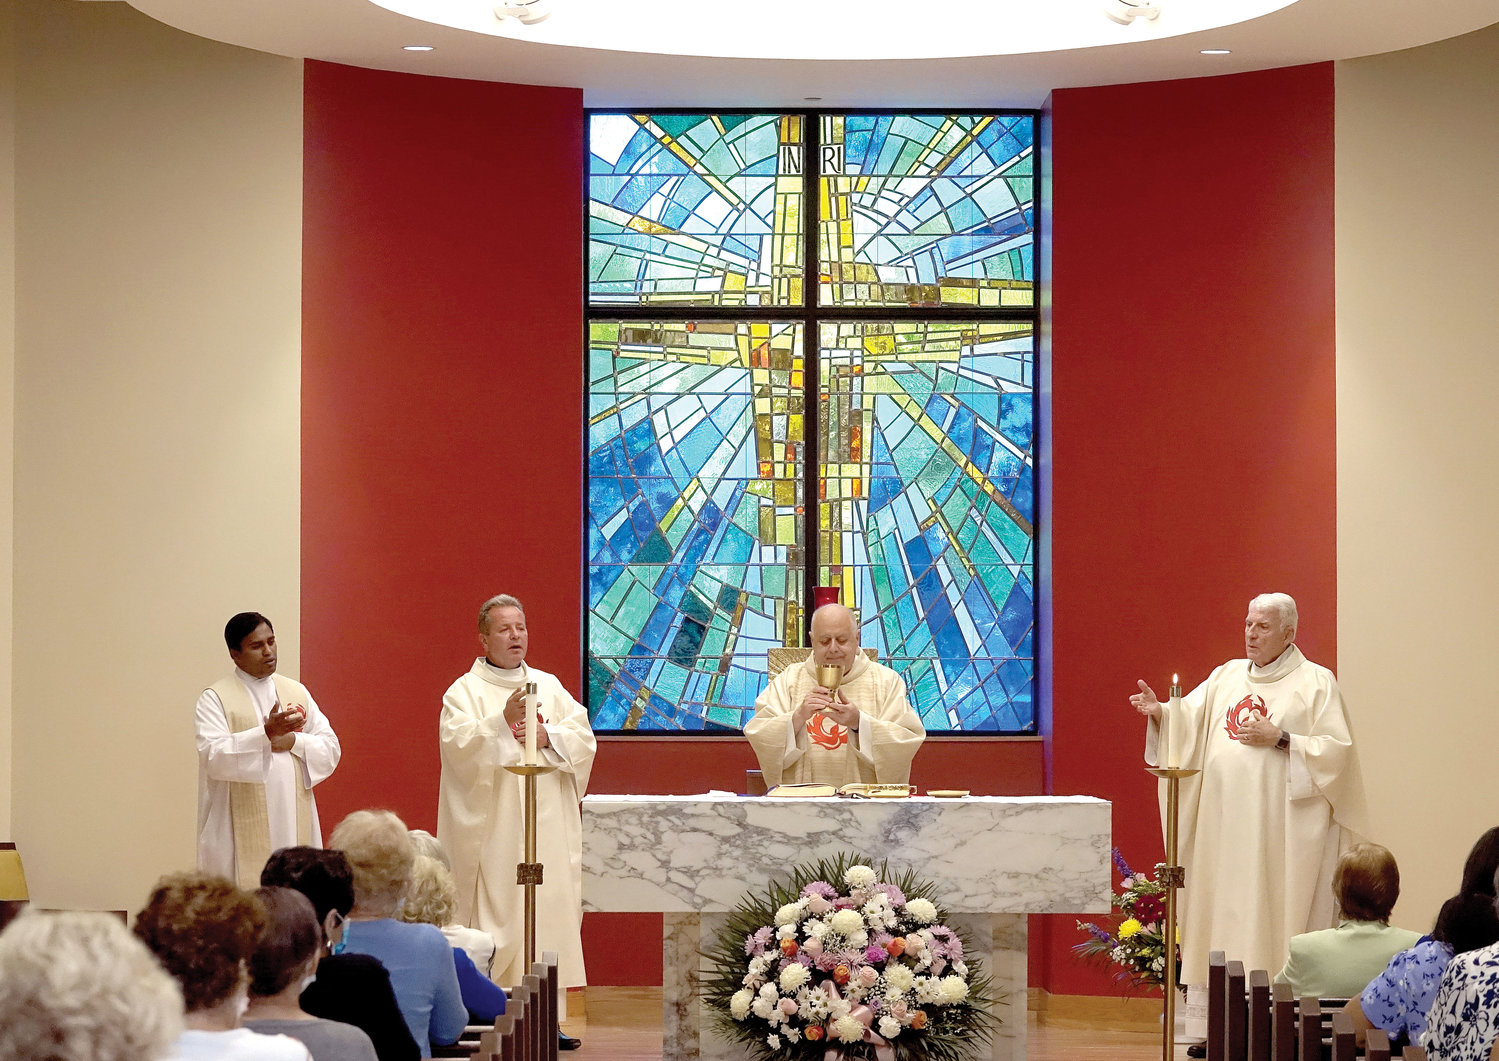 Msgr. Joseph LaMorte, vicar general and moderator of the
curia for the archdiocese, celebrates Mass marking the reopening of St. Paul’s Church in Congers Aug. 8. Standing
on the altar with Msgr. LaMorte are Father Joseph Kumar Narisetty, parochial vicar of St. Paul-St. Ann parish, far left; Father Vladimir Chripko, C.O., pastor of St. Paul-St. Ann parish; and Msgr. Emmet Nevin, dean of Rockland Deanery, right.